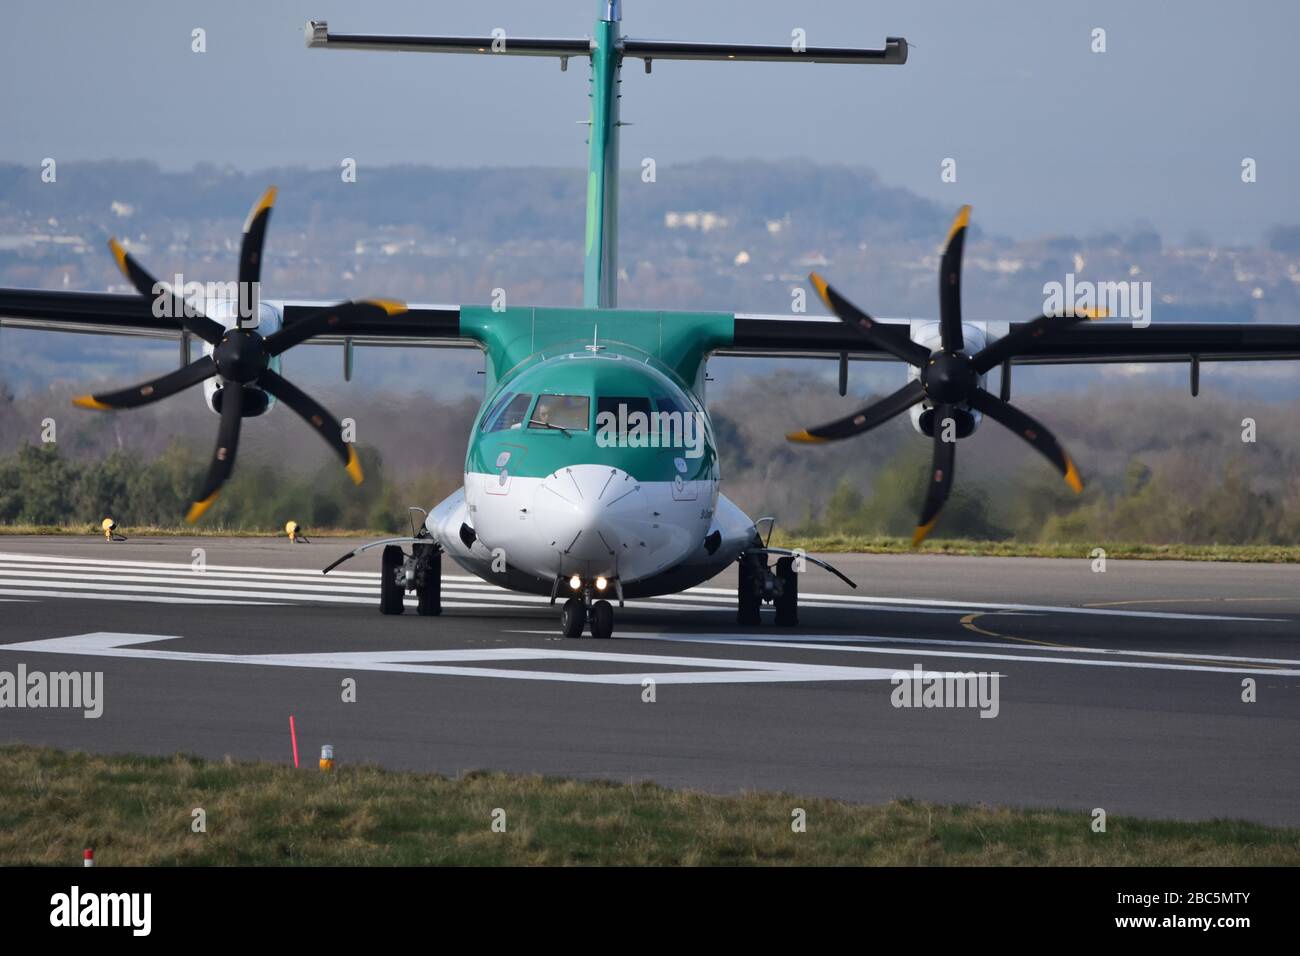 A small Aer Lingus airline propeller plane at Bristol International Airport about to take off on the runway Stock Photo